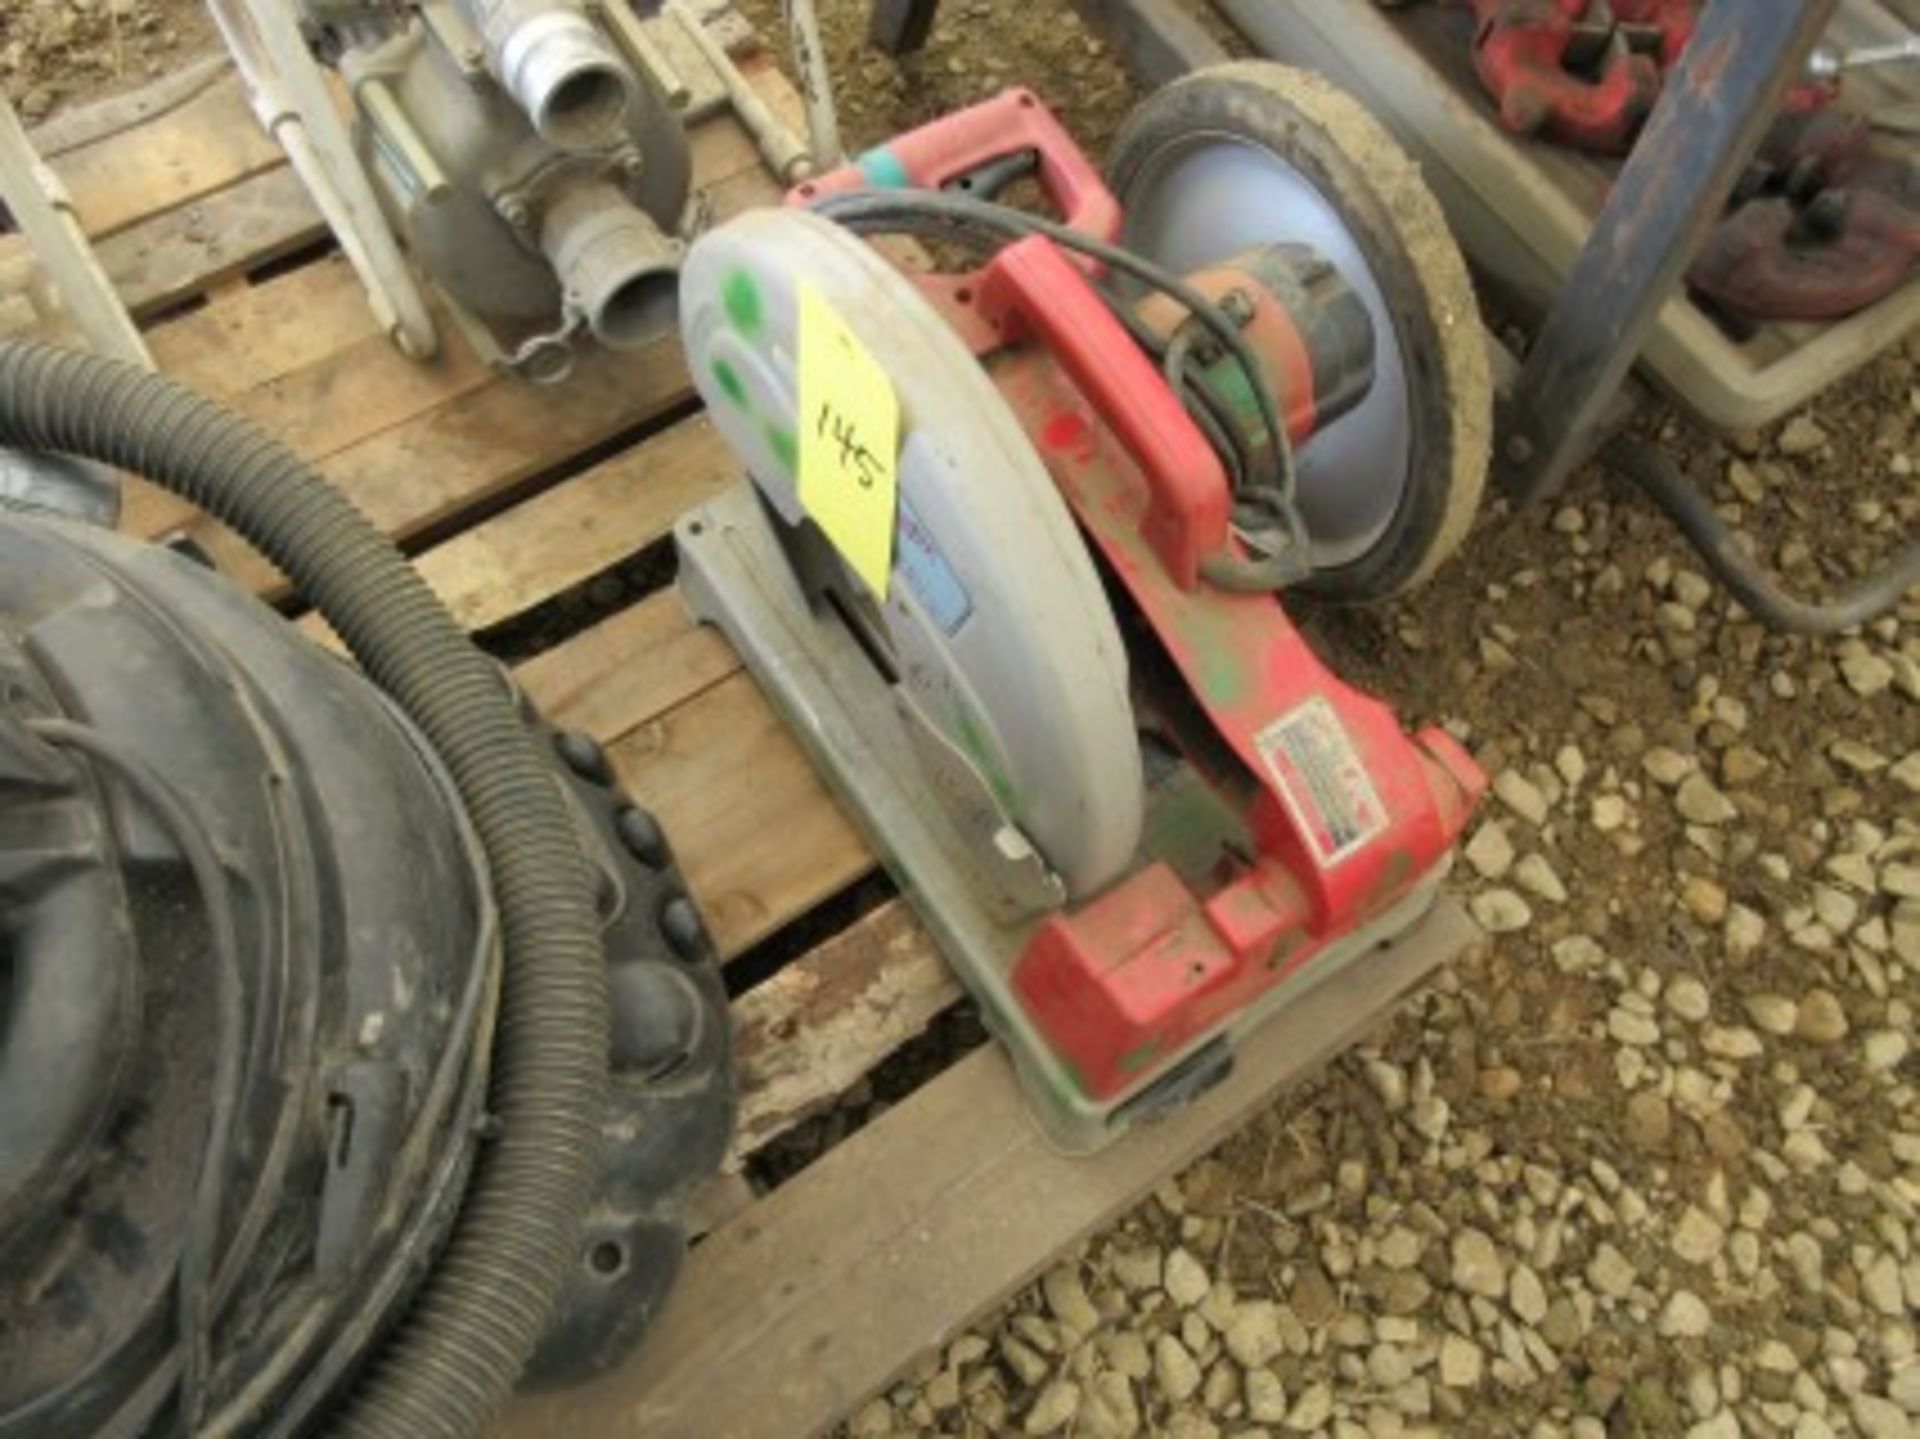 Milwaukee 14'' elec. chop saw (runs but has missing blade attachment parts)